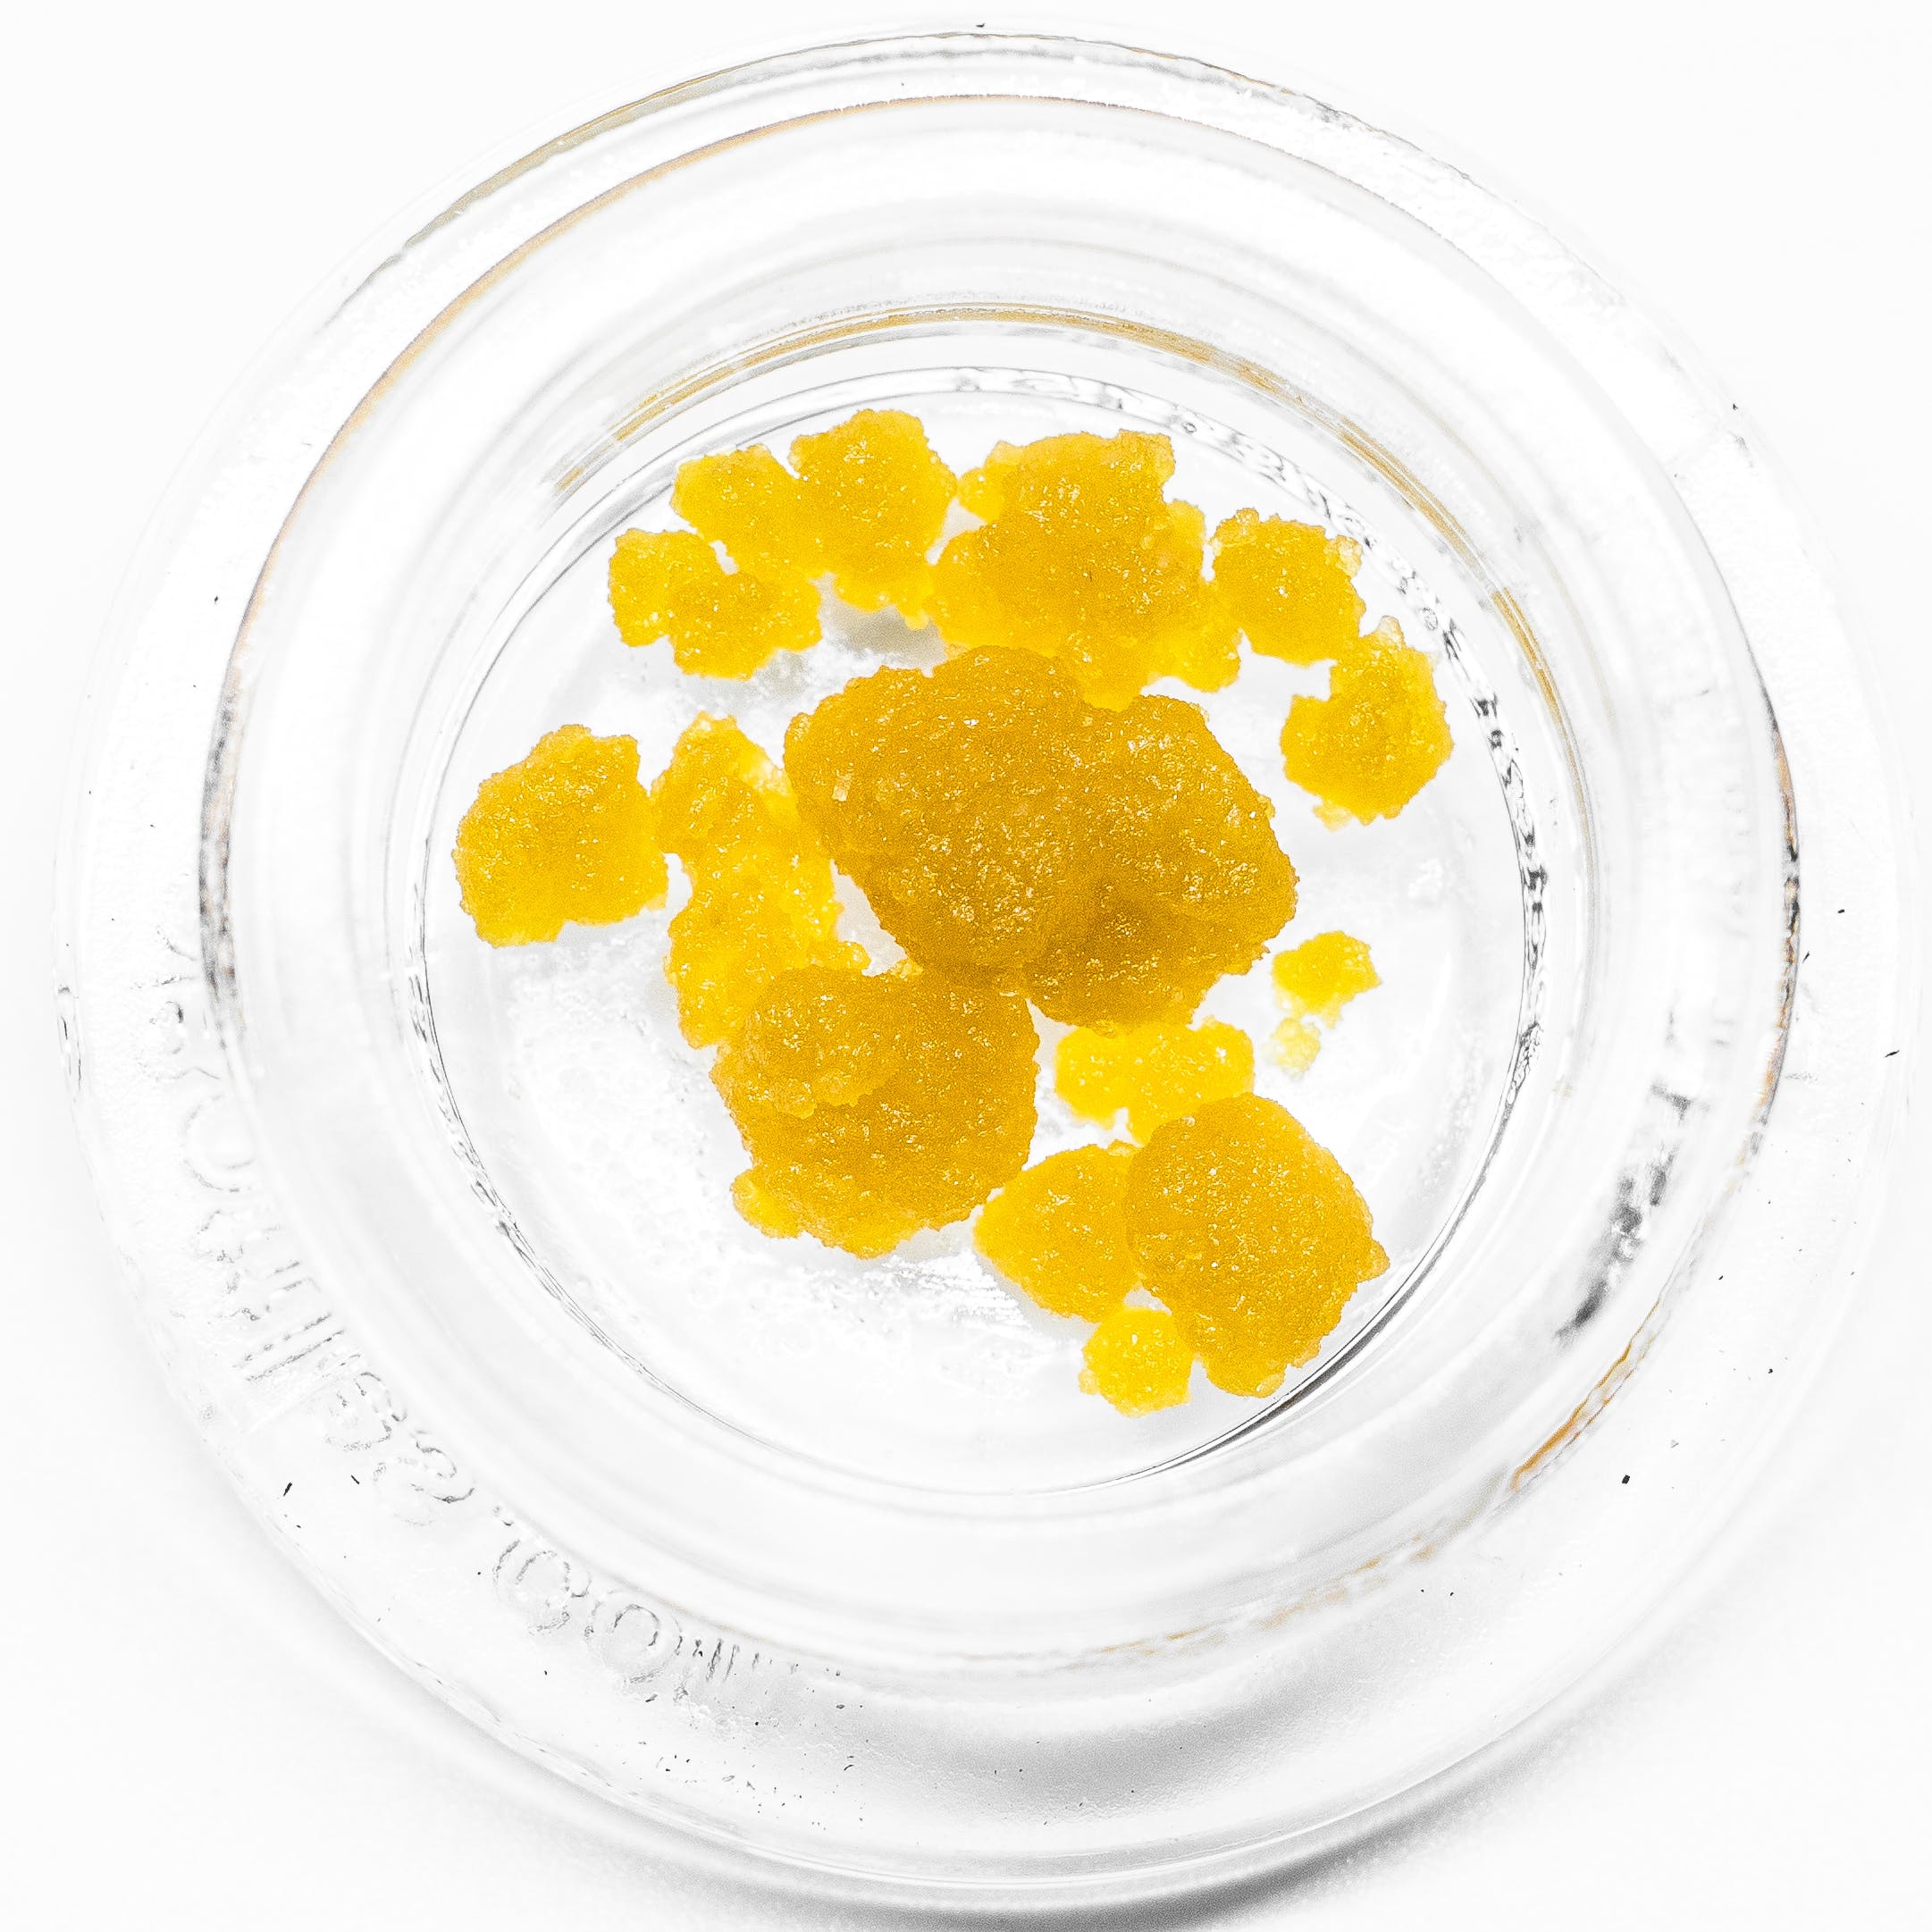 concentrate-2445-summit-blueberry-live-resin-i-75-69-25-buy-one-2c-get-one-50-25-off